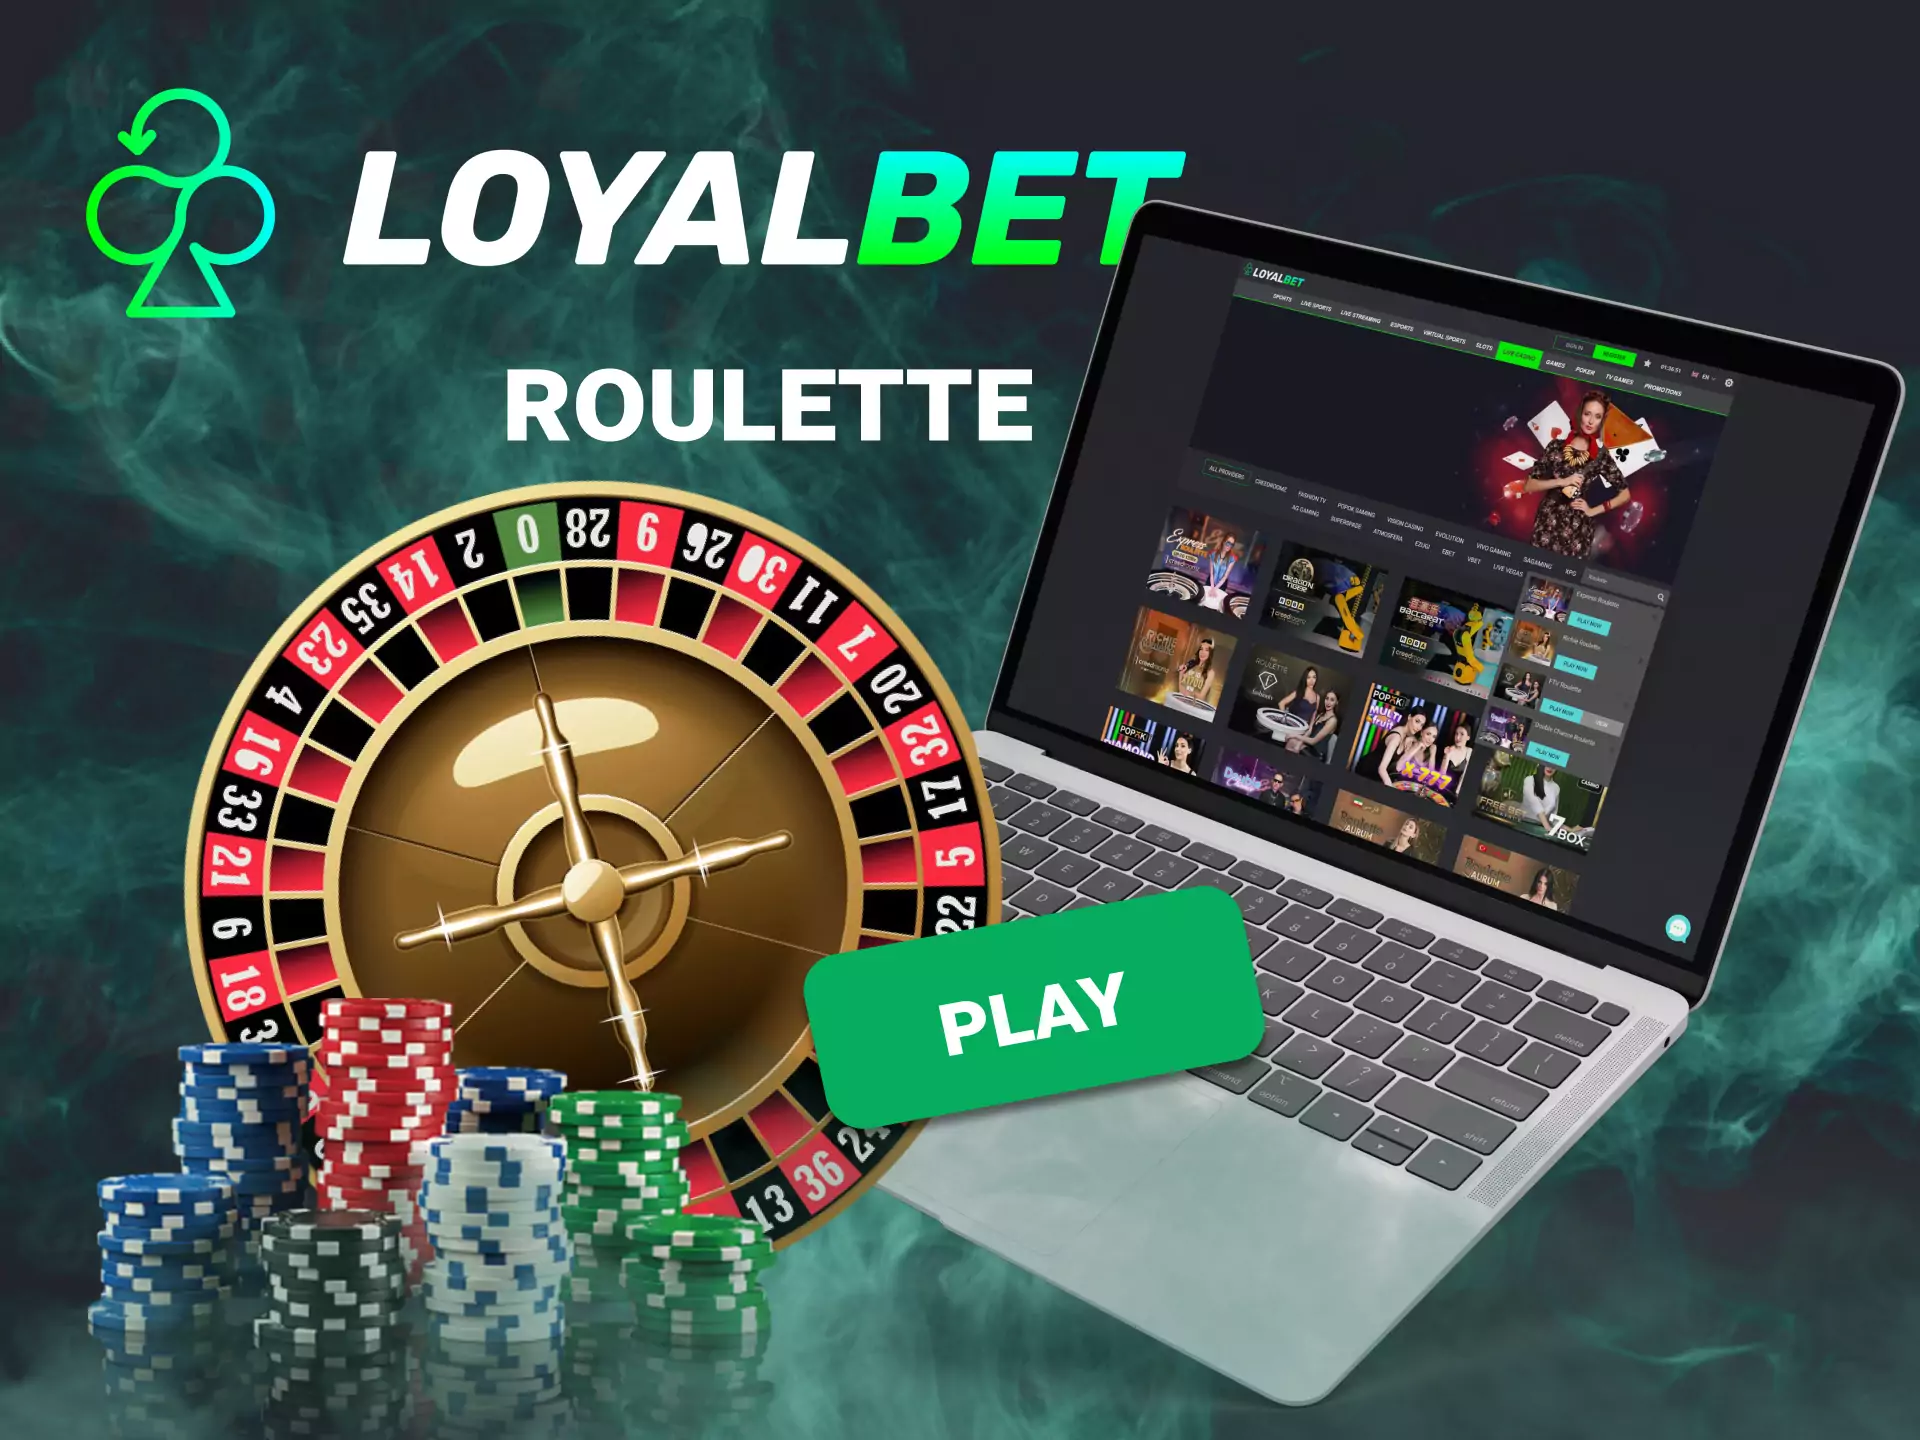 On Loyalbet, you can play an online roulette.